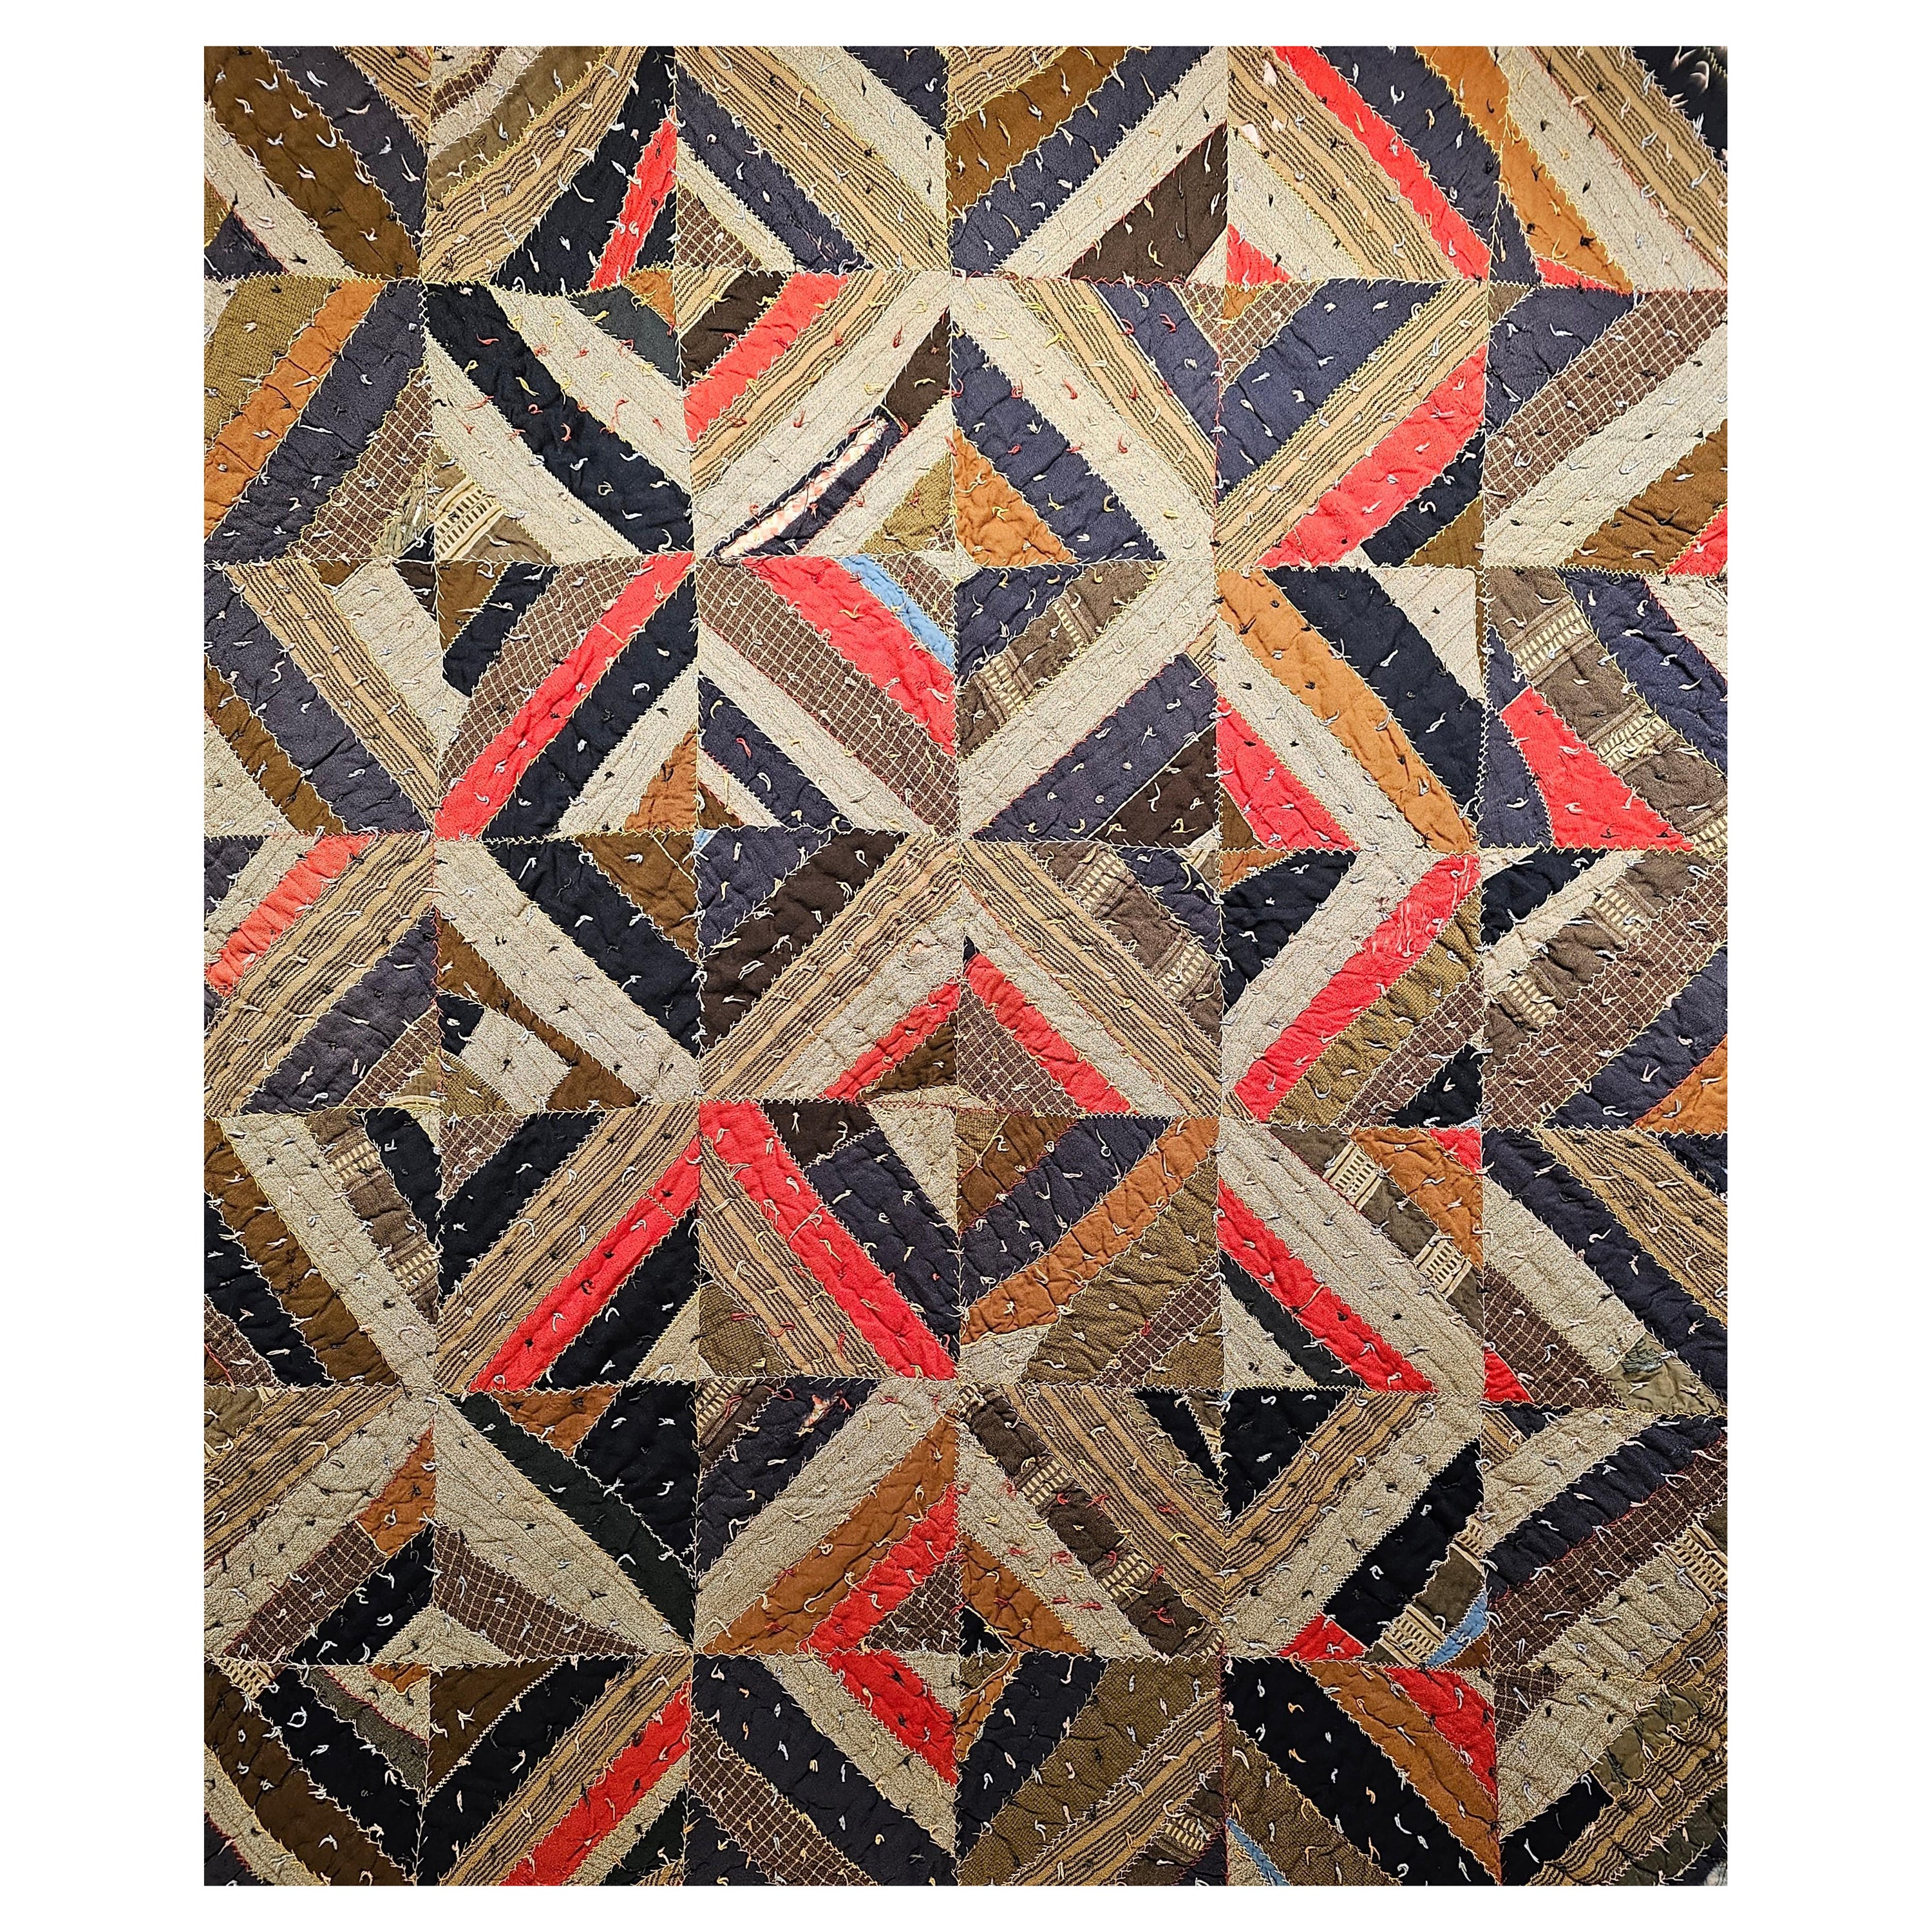 An American Civil War Era African American Southern Quilt From the Deep South